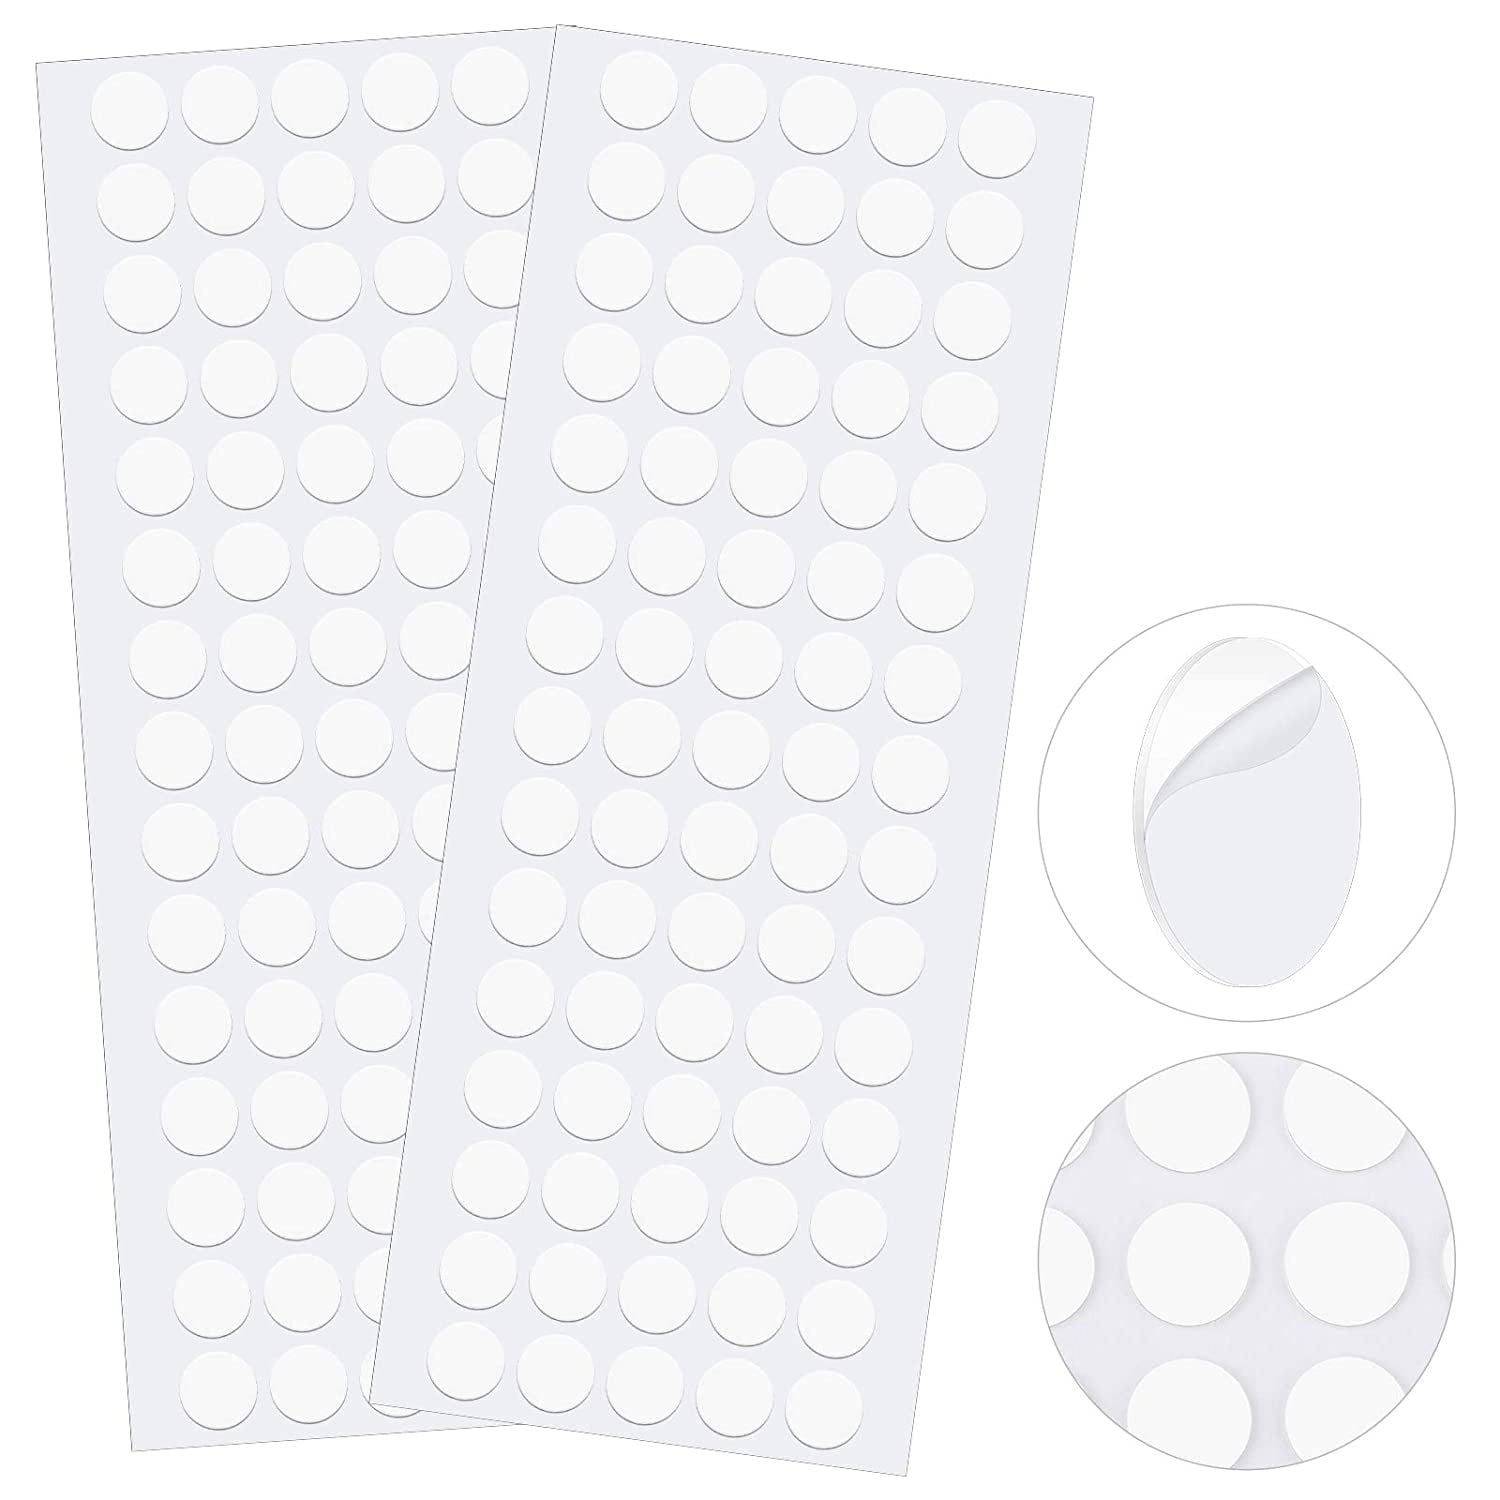 Wood Metal Ceramic Glass 210 Pieces Transparent Adhesive Putty Clear Mounting Sticky Putty Traceless Removable Round Putty Reusable Double-Sided Nano Gel Mat for Festival DIY Craft 